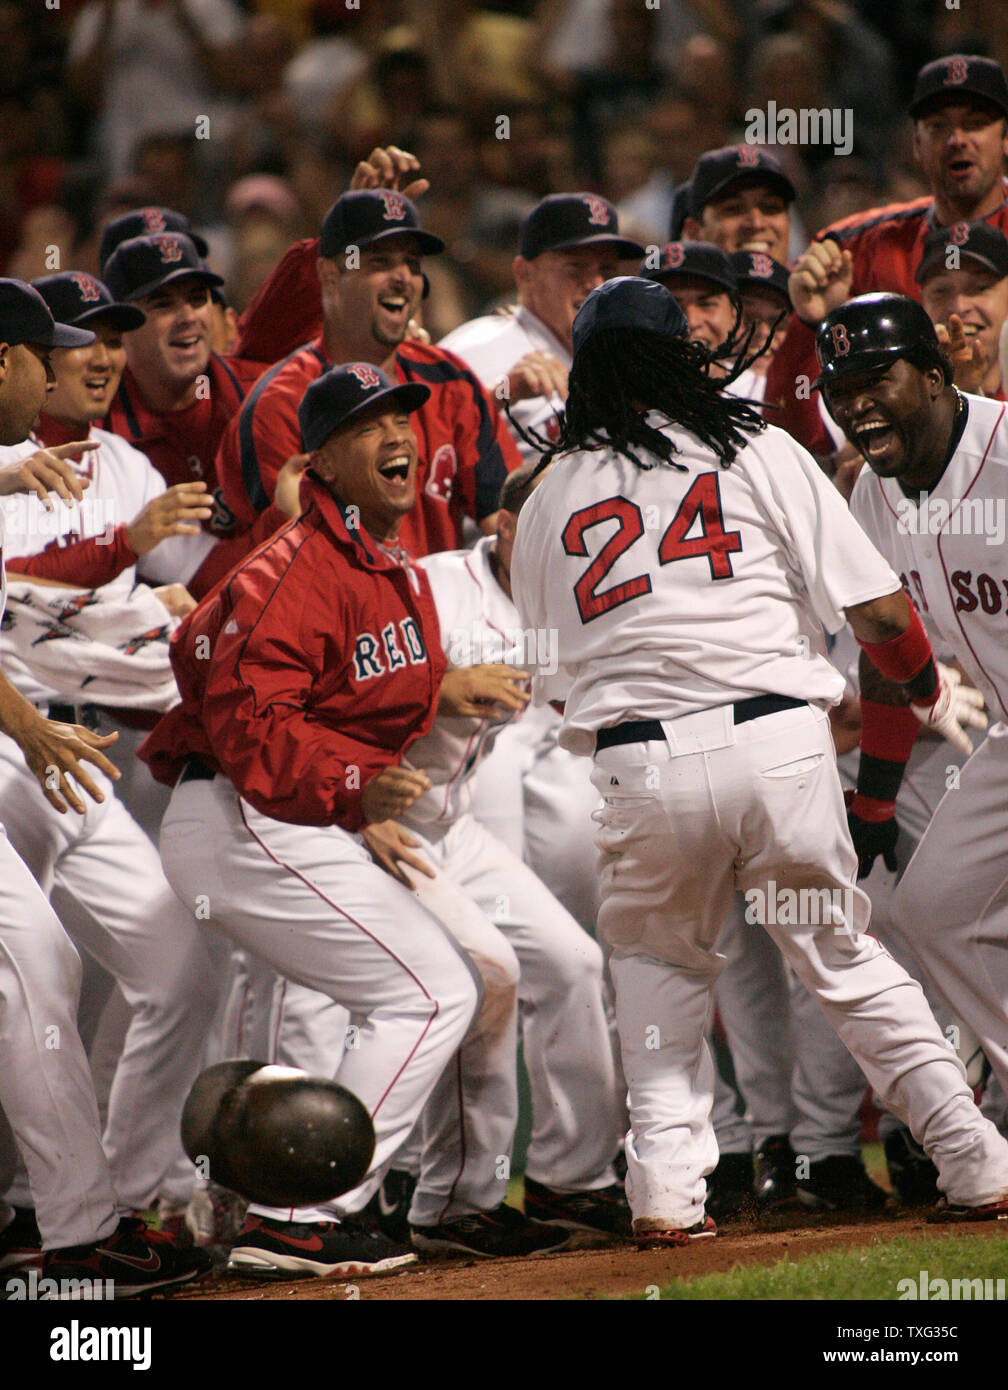 The Boston Red Sox cheer from home plate as runner Manny Ramirez